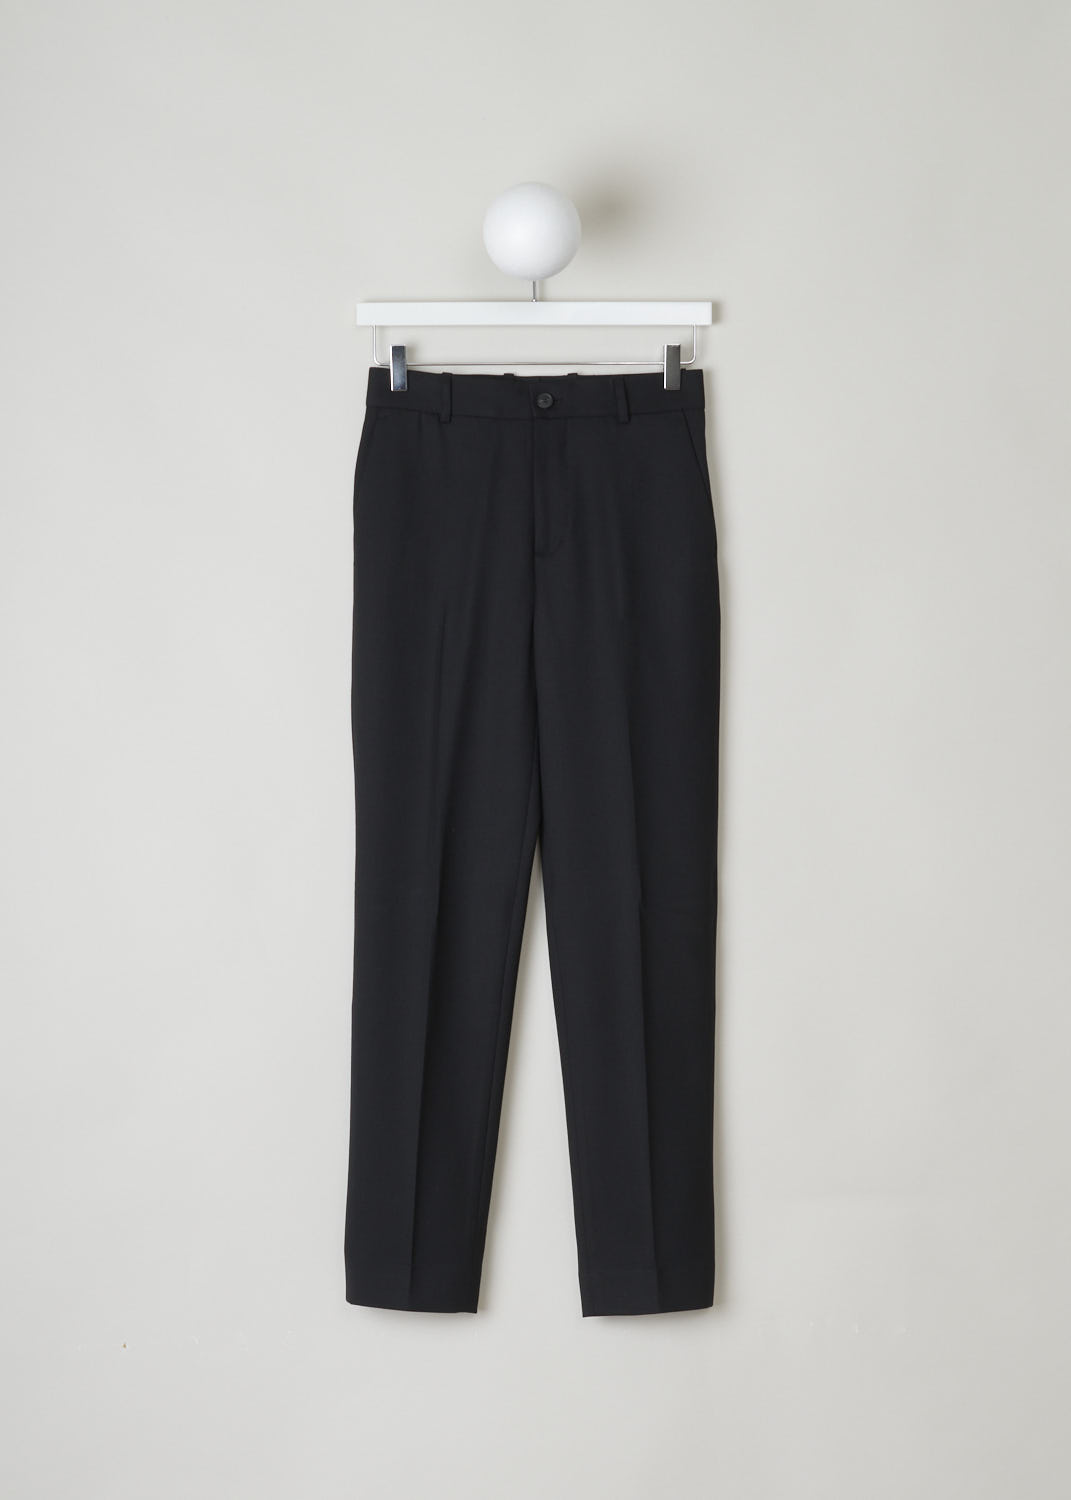 BALENCIAGA, CLASSIC BLACK PANTS, 556169_TDT06_1000, Black, Front, Classic straight legged pants with a center crease. The pants comes with a button and zipper closure. The wide waistband has belt loops. The pants has side pockets on either side, as well as a single welt pocket in the back. 
